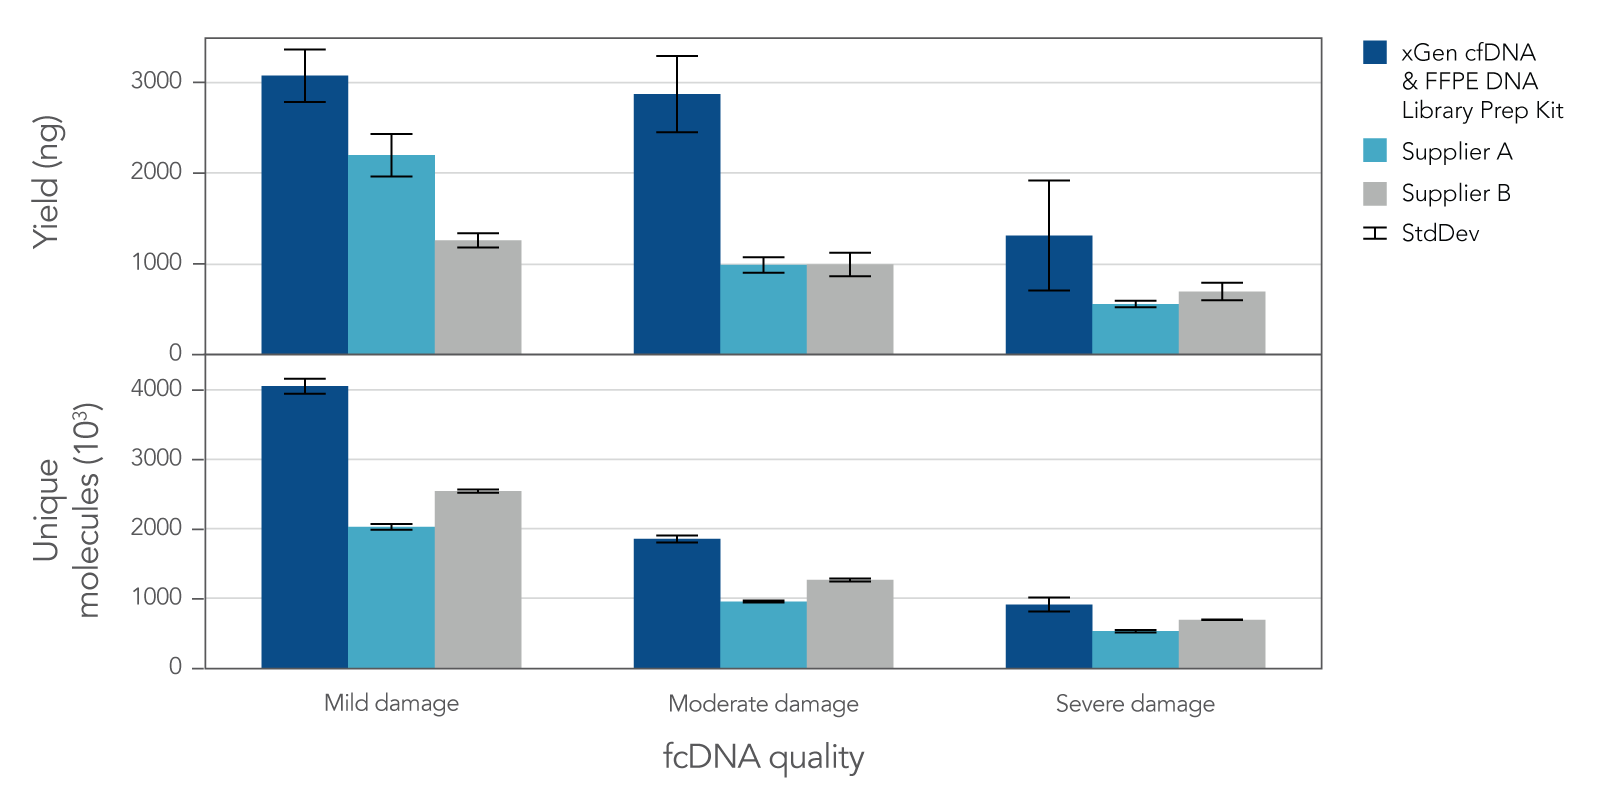 In this example, the xGen cfDNA & FFPE DNA Library Prep Kit delivers higher library yield and complexity from FFPE samples across a range of sample qualities